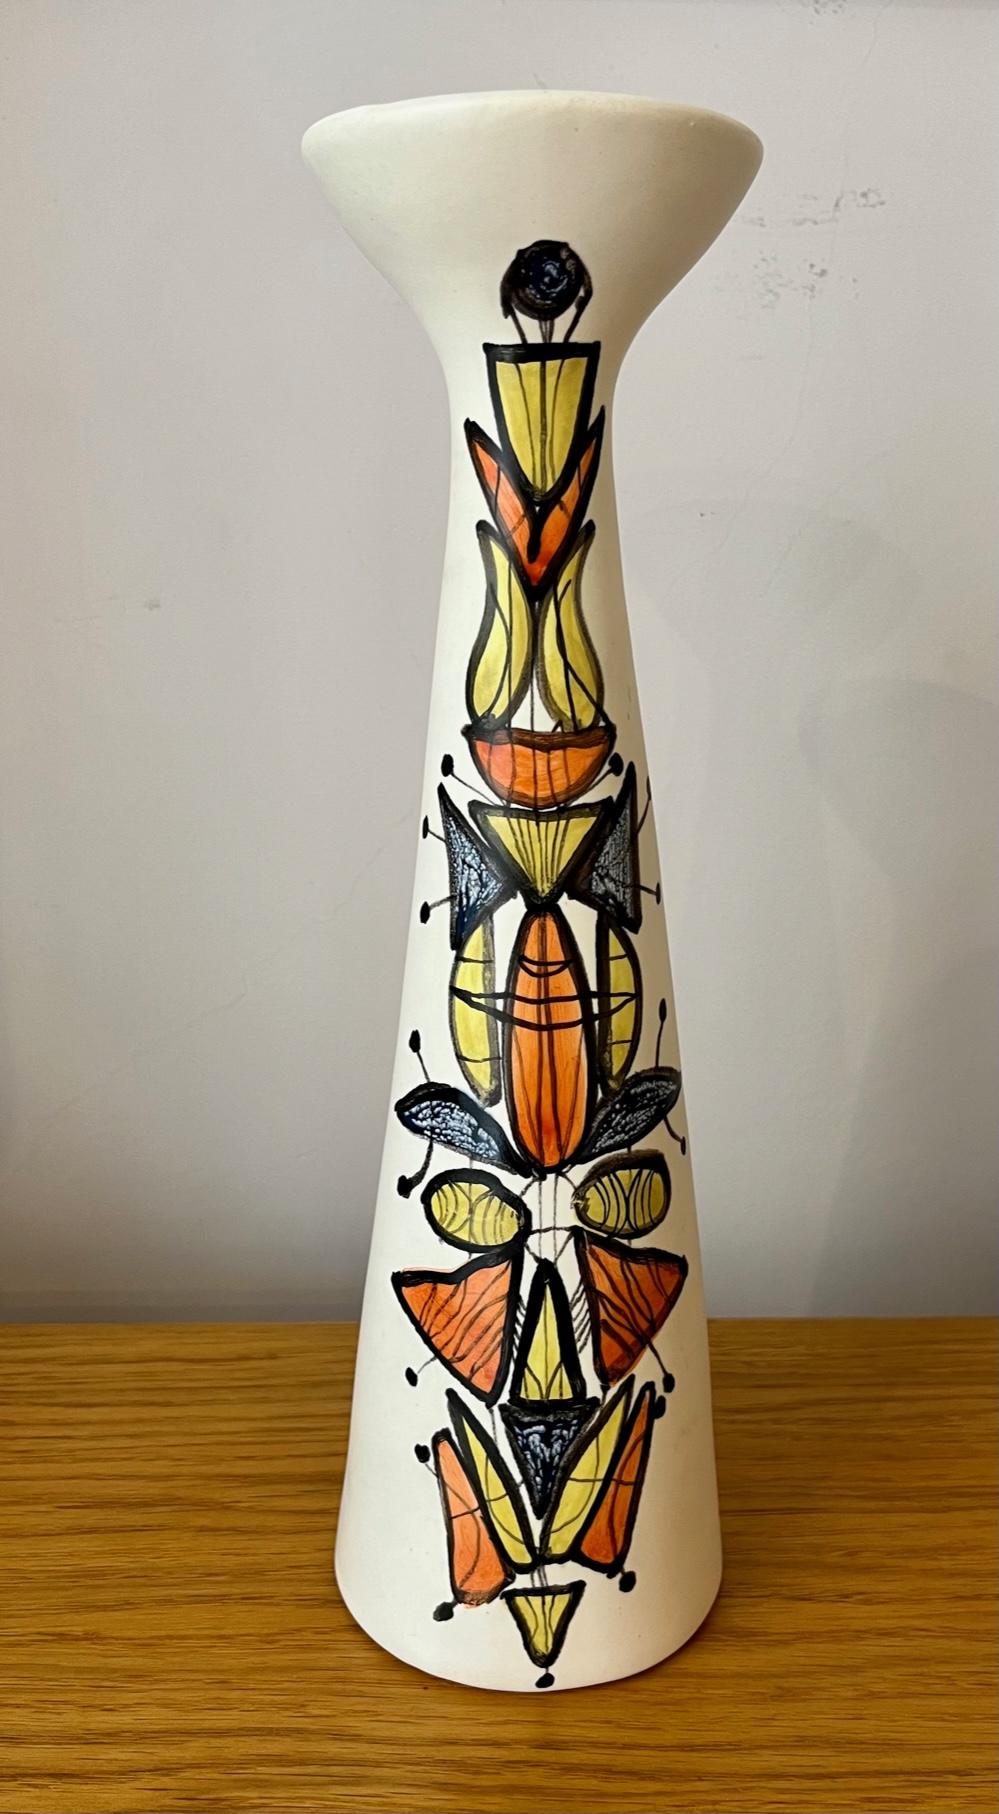 Ceramic vase ( or bottle ) by Roger Capron.`
Conical shape with wide collar 
White glazed ceramic with polychrome decoration
signed 